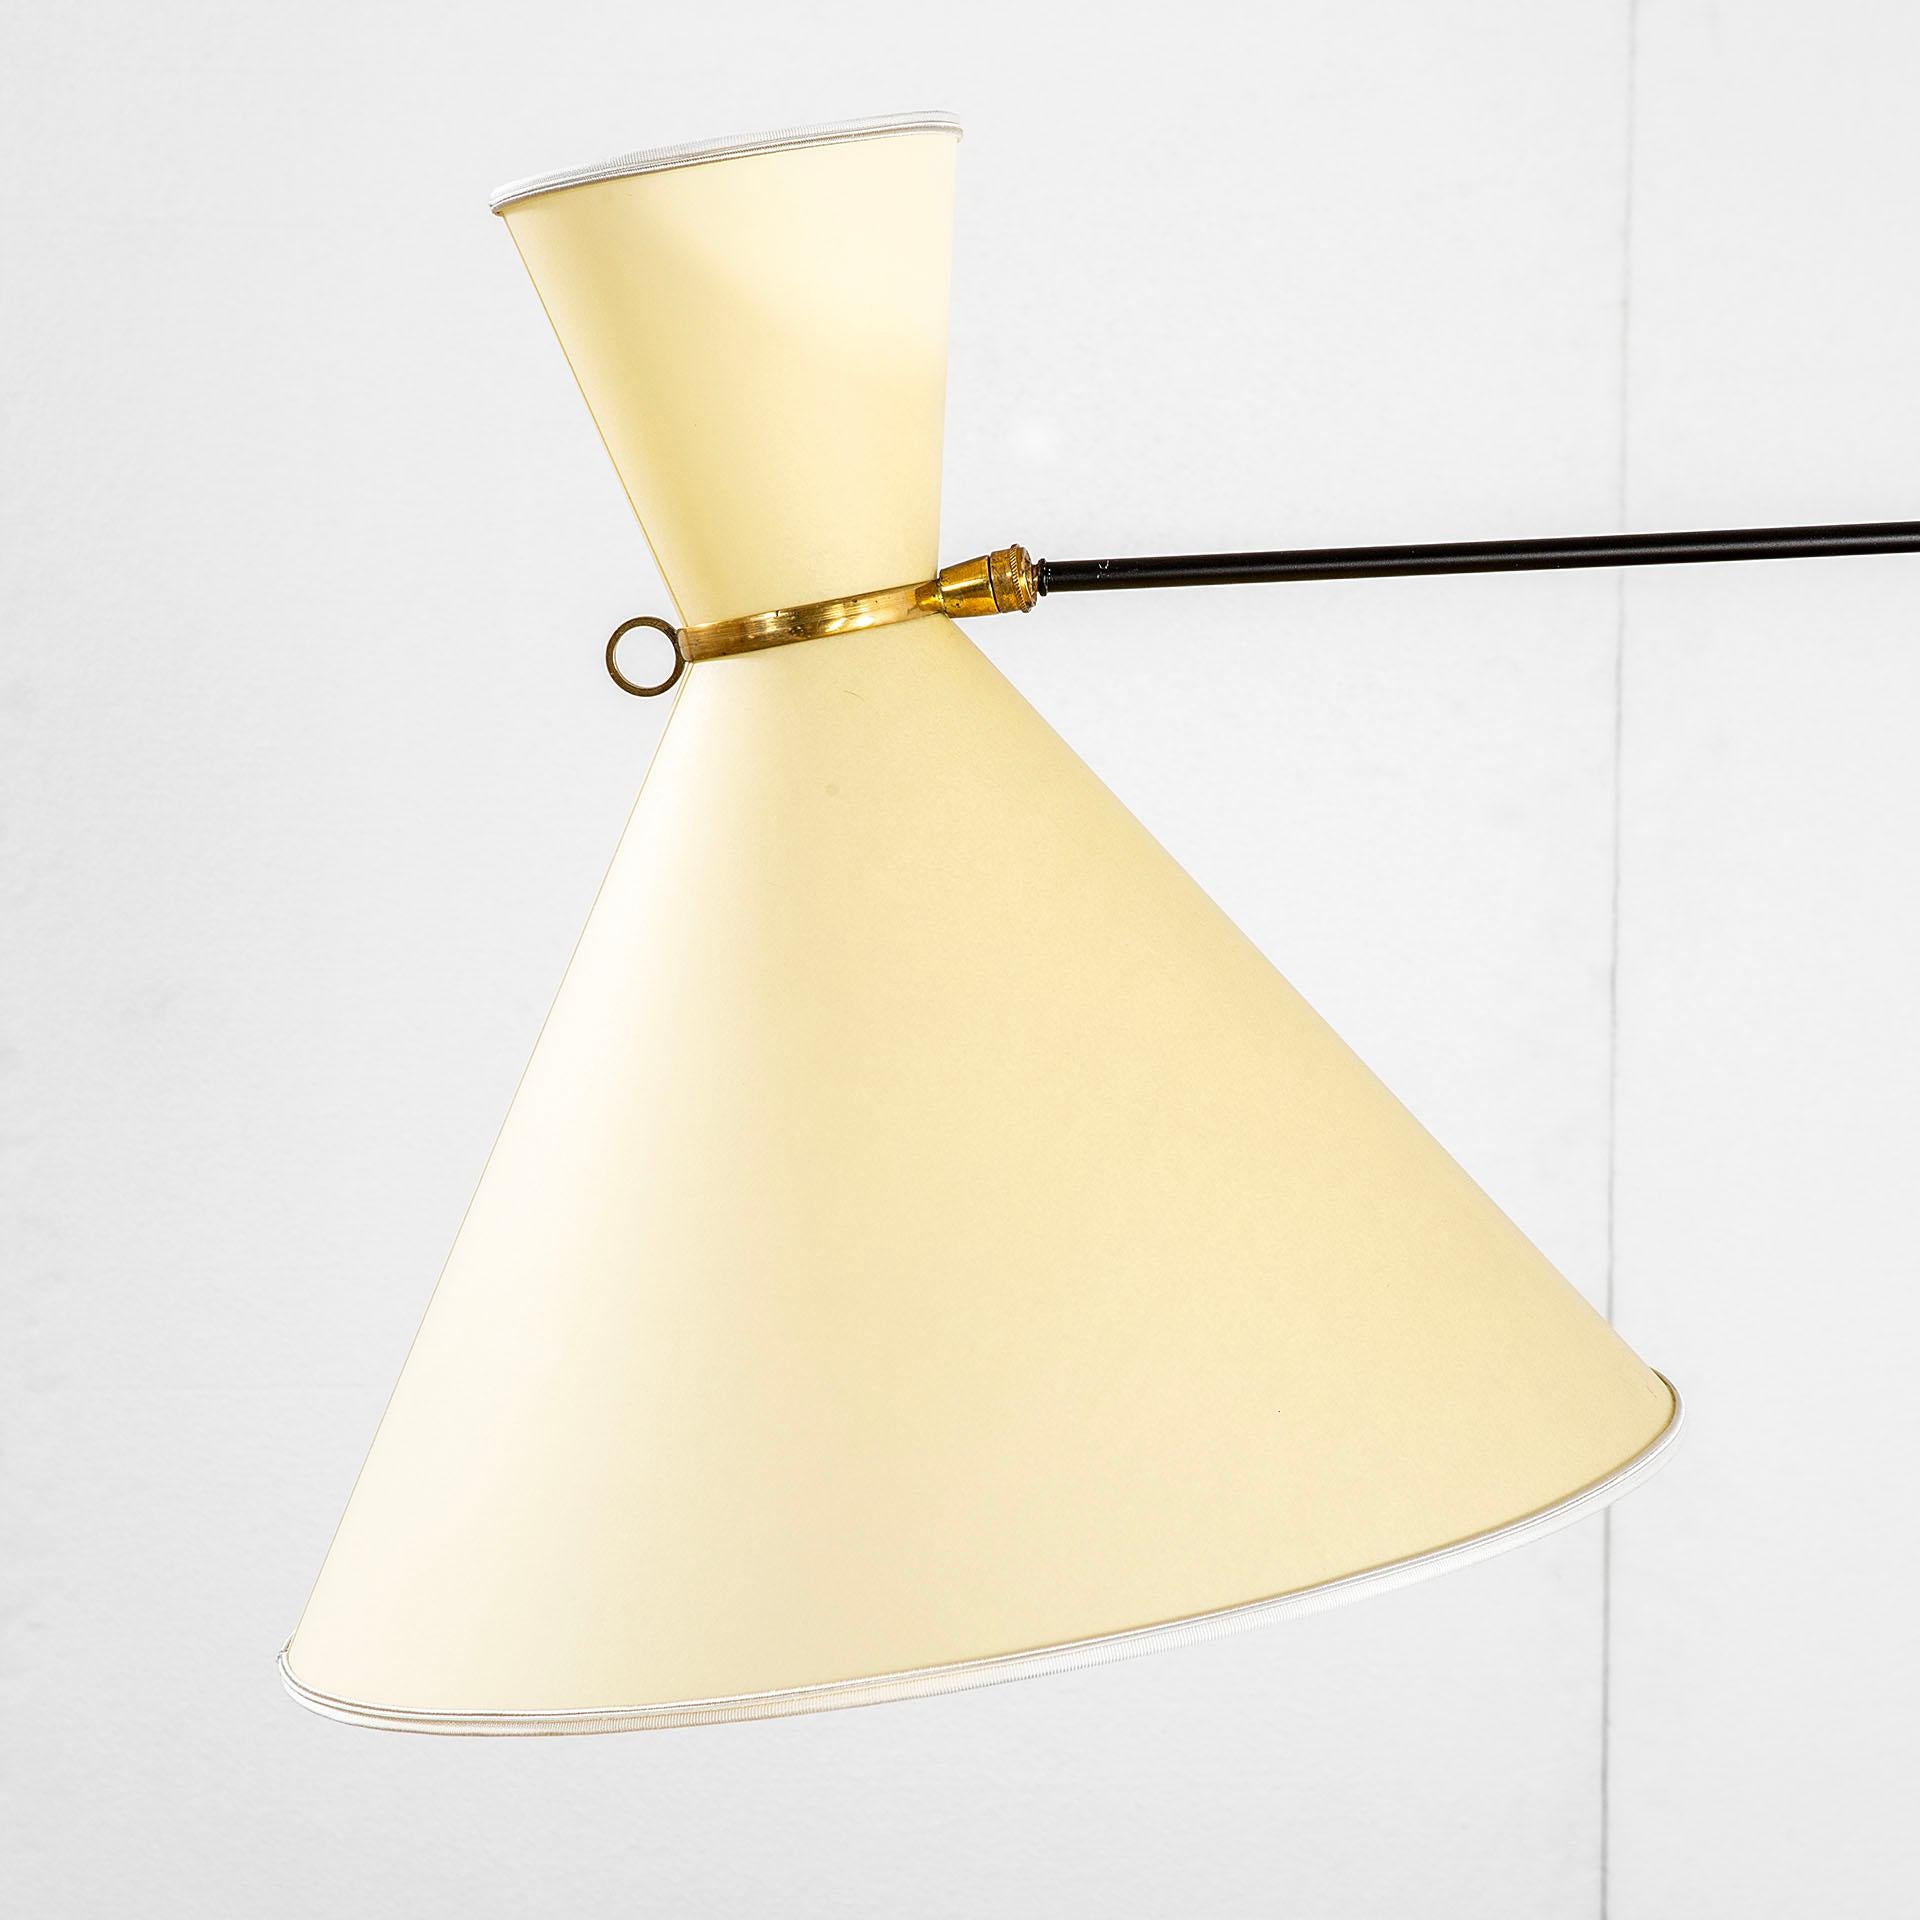 French 20th Century Robert Mathieu Directionable Wall Lamp in Brass and Fabric, 60s For Sale